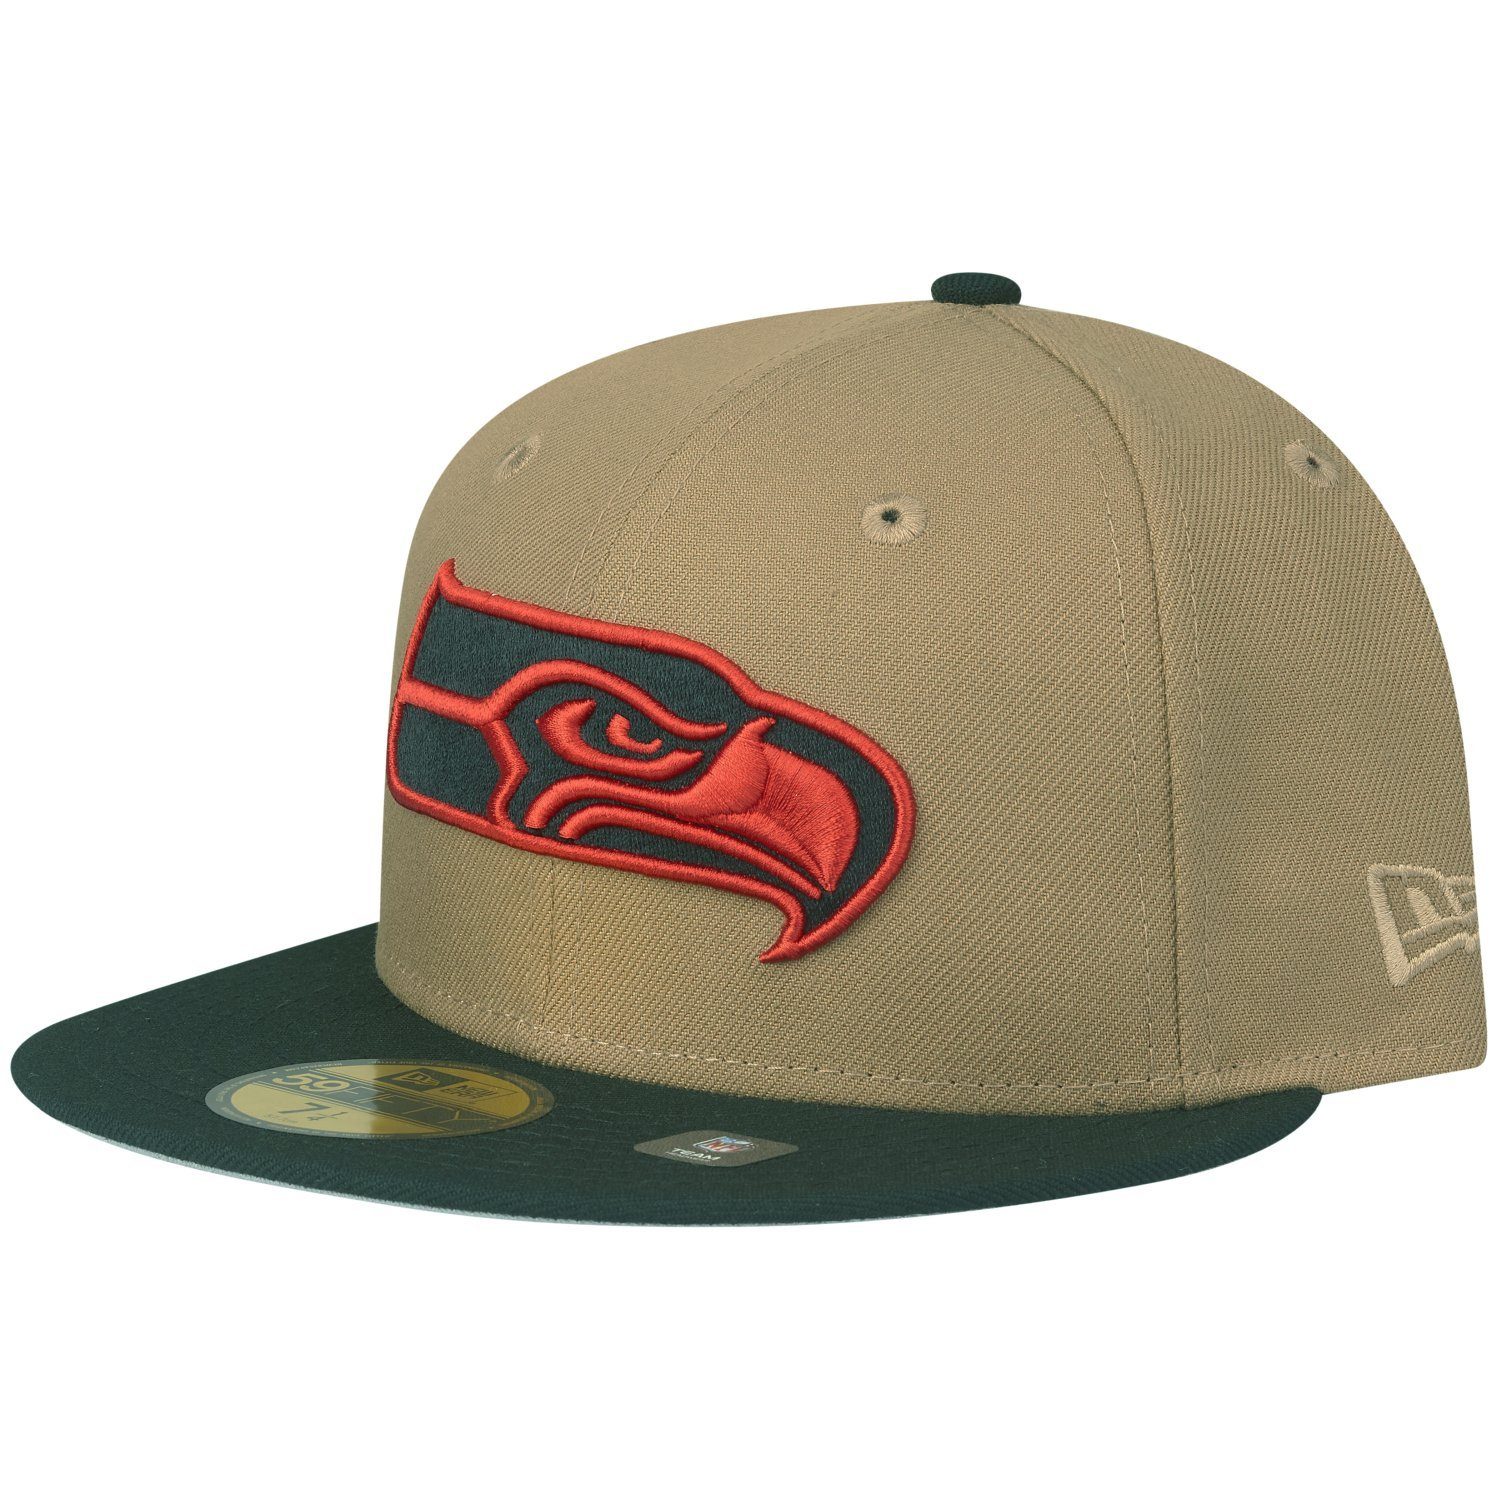 Fitted New 59Fifty Era Seahawks Seattle Cap